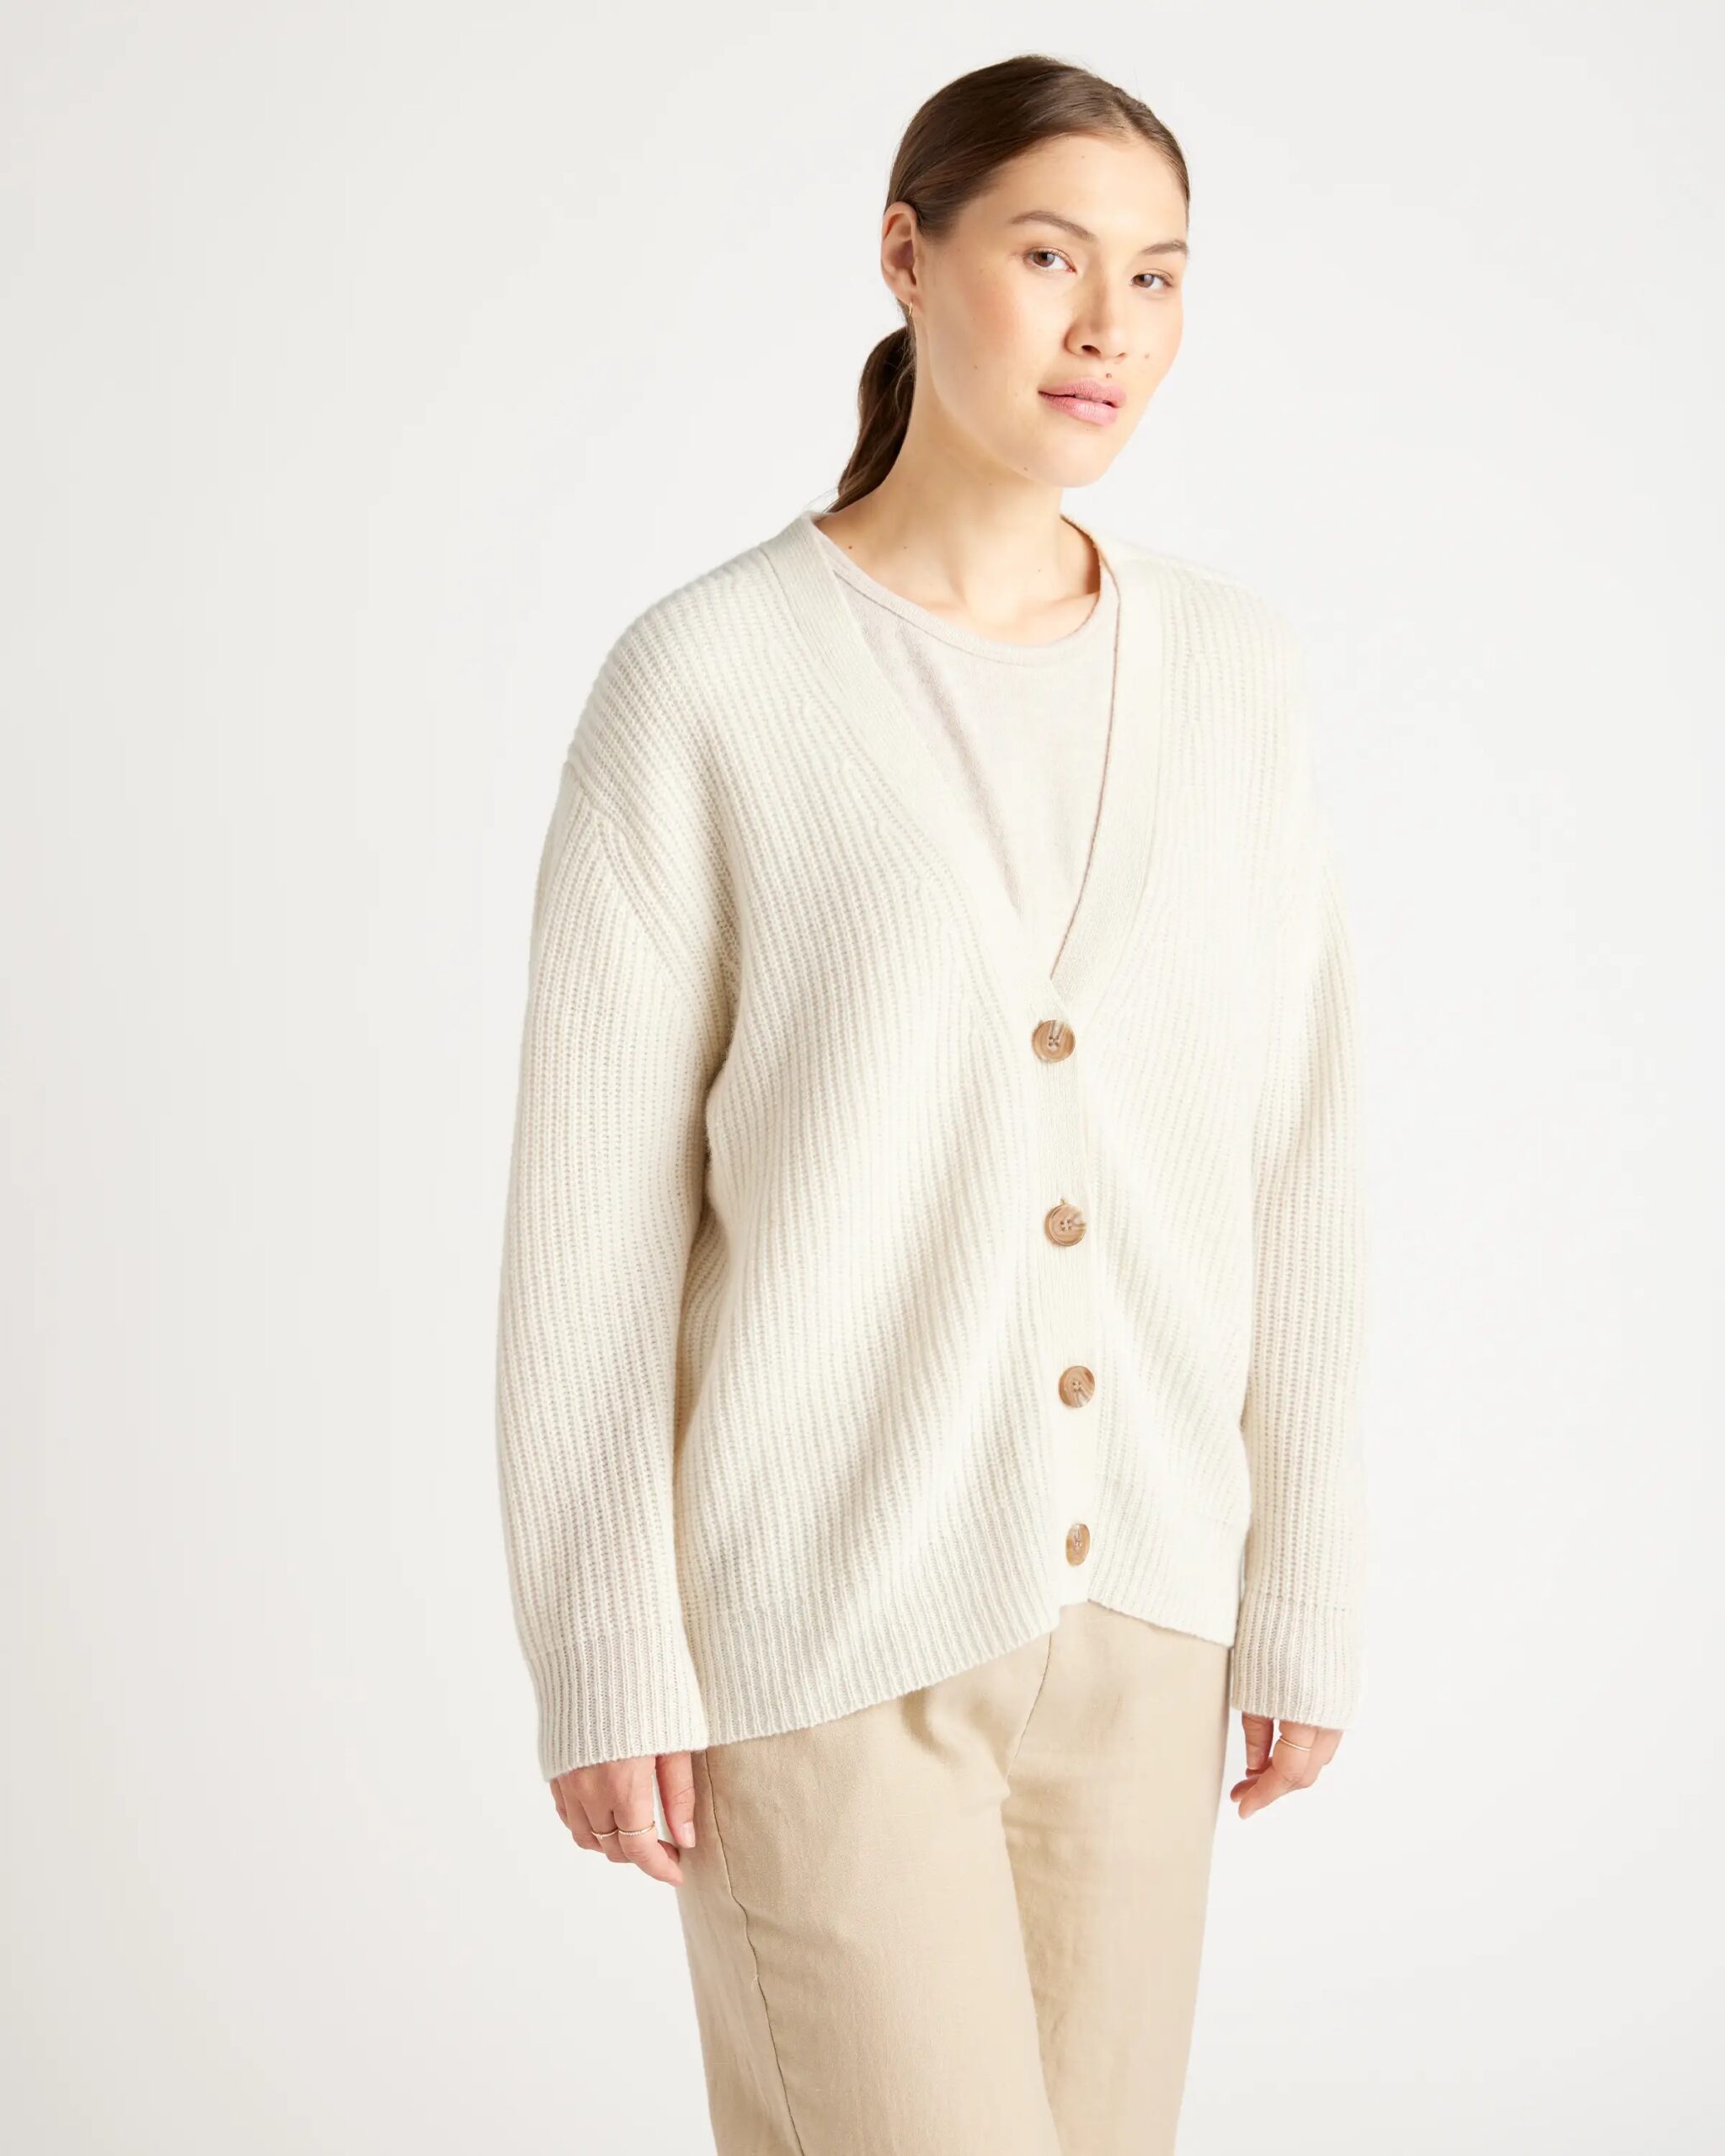 The Sell-Out Jenni Kayne Cocoon Sweater Is Worth the Cash | Well+Good